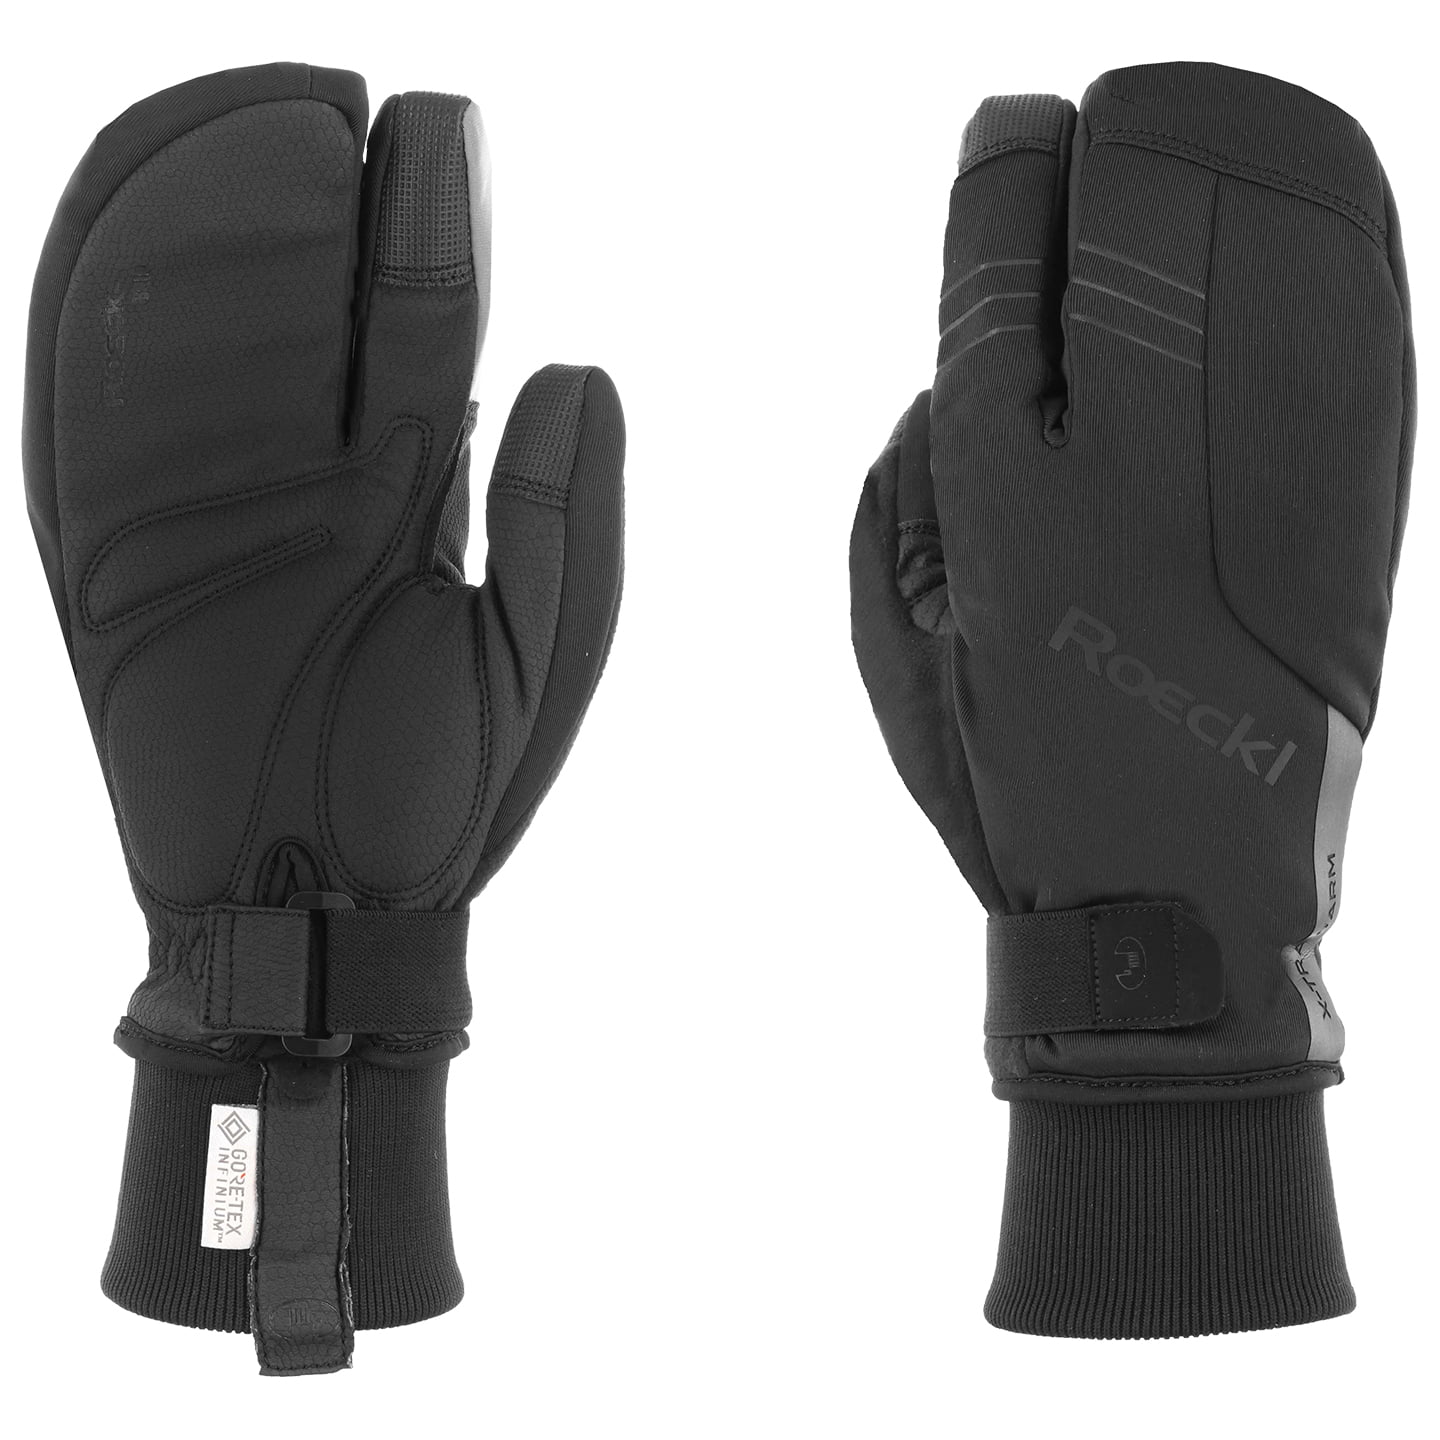 ROECKL Villach 2 Trigger Winter Gloves Winter Cycling Gloves, for men, size 9,5, Bike gloves, Cycling wear